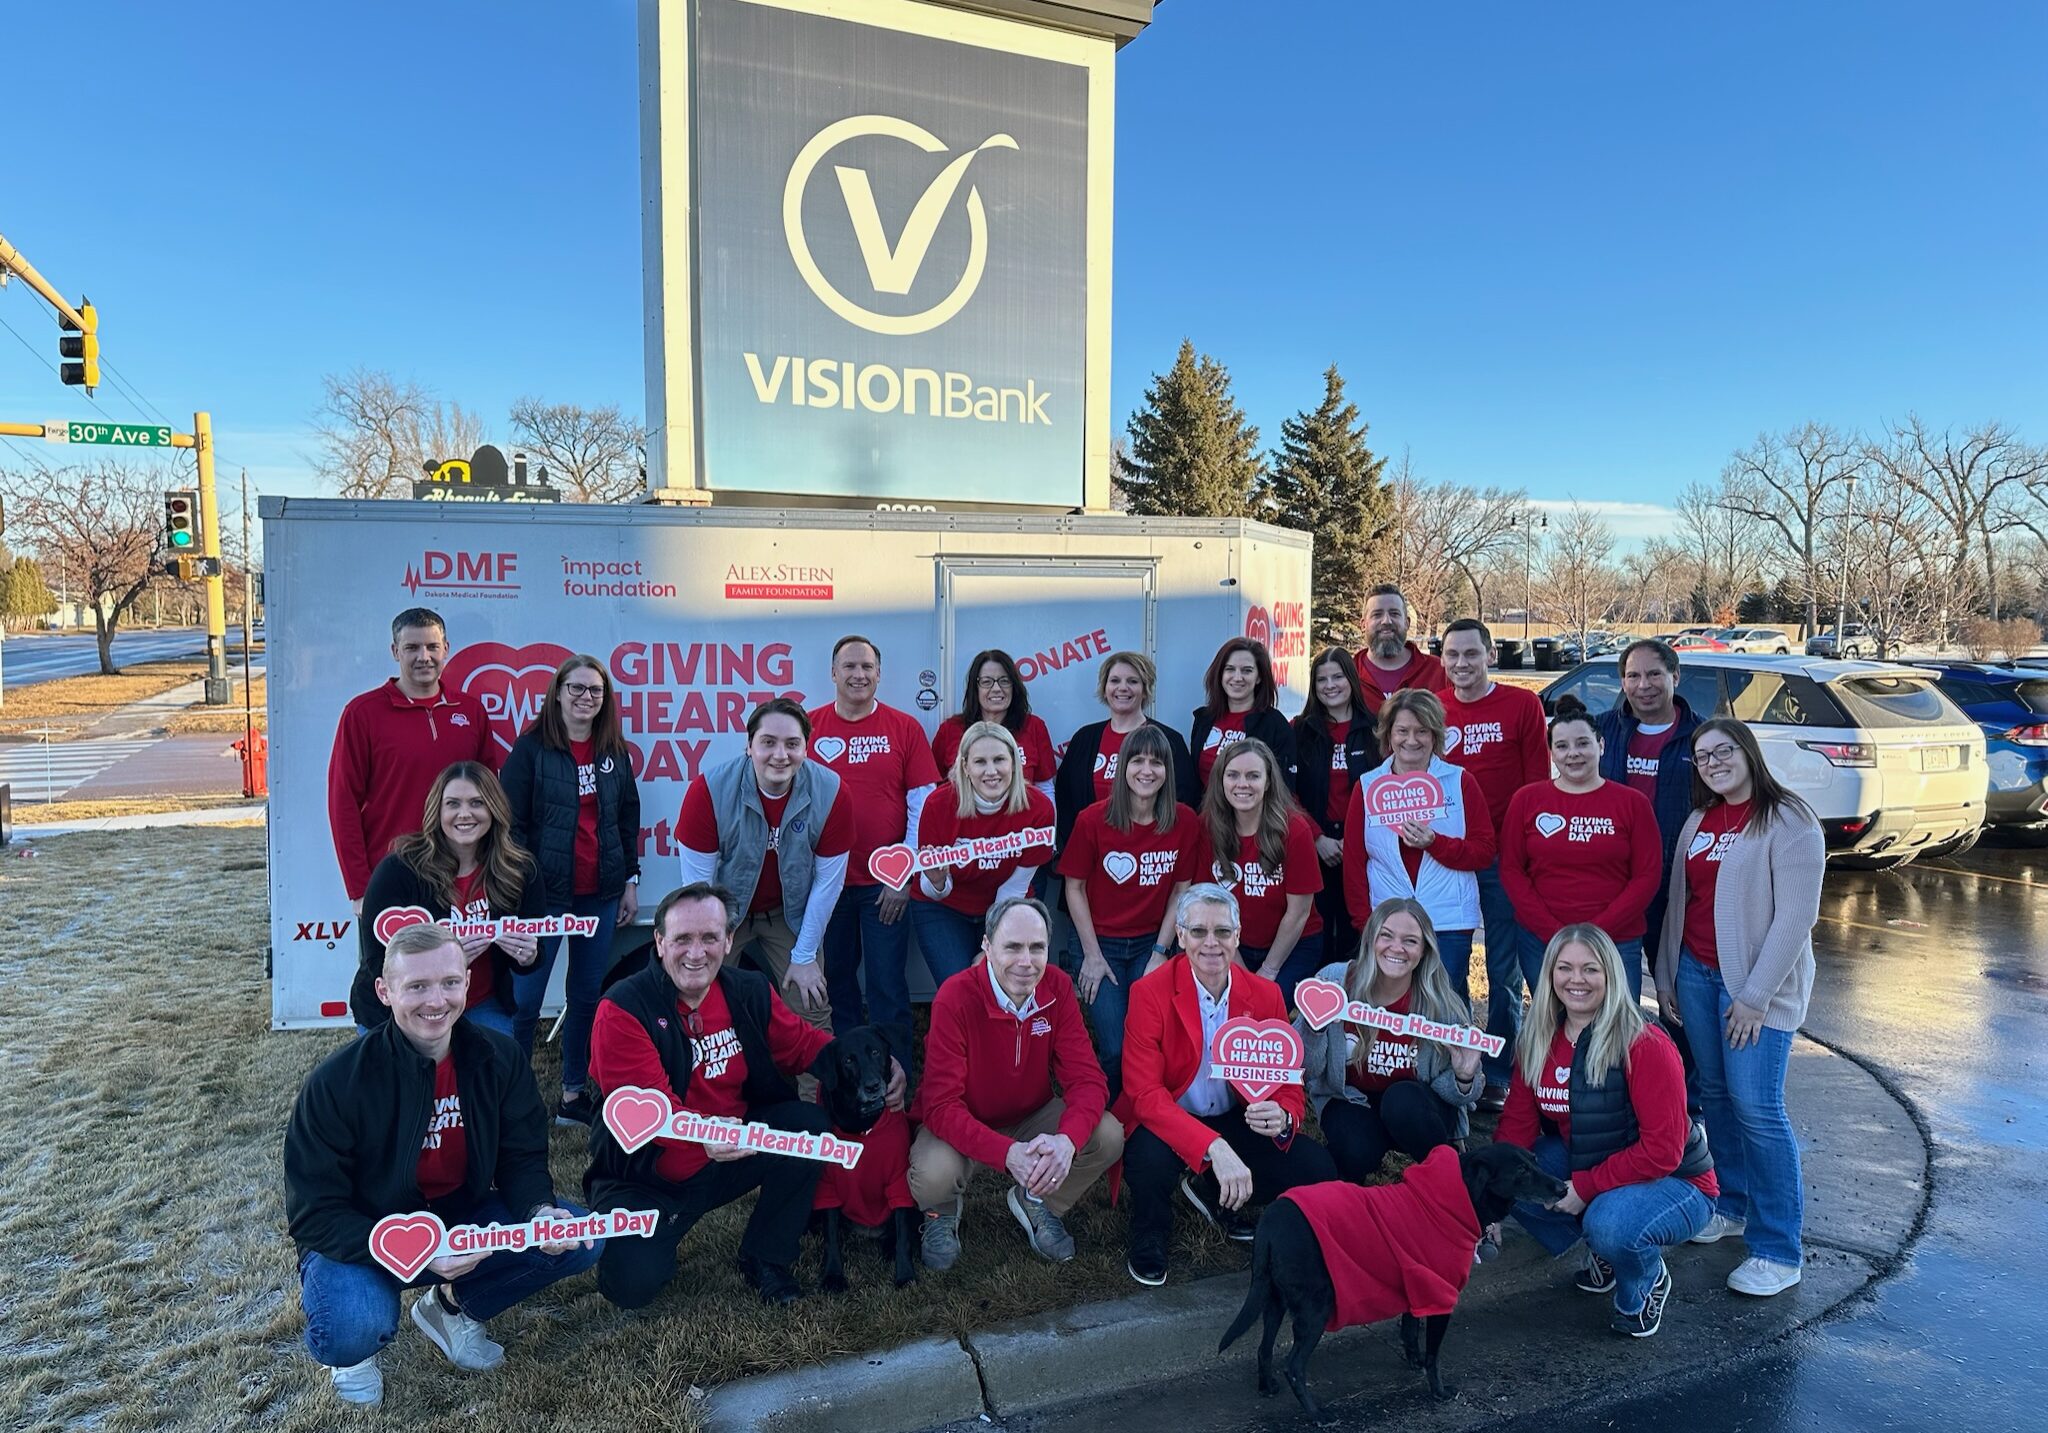 Group picture featuring VISIONBank team members dressed up for Giving Hearts Day